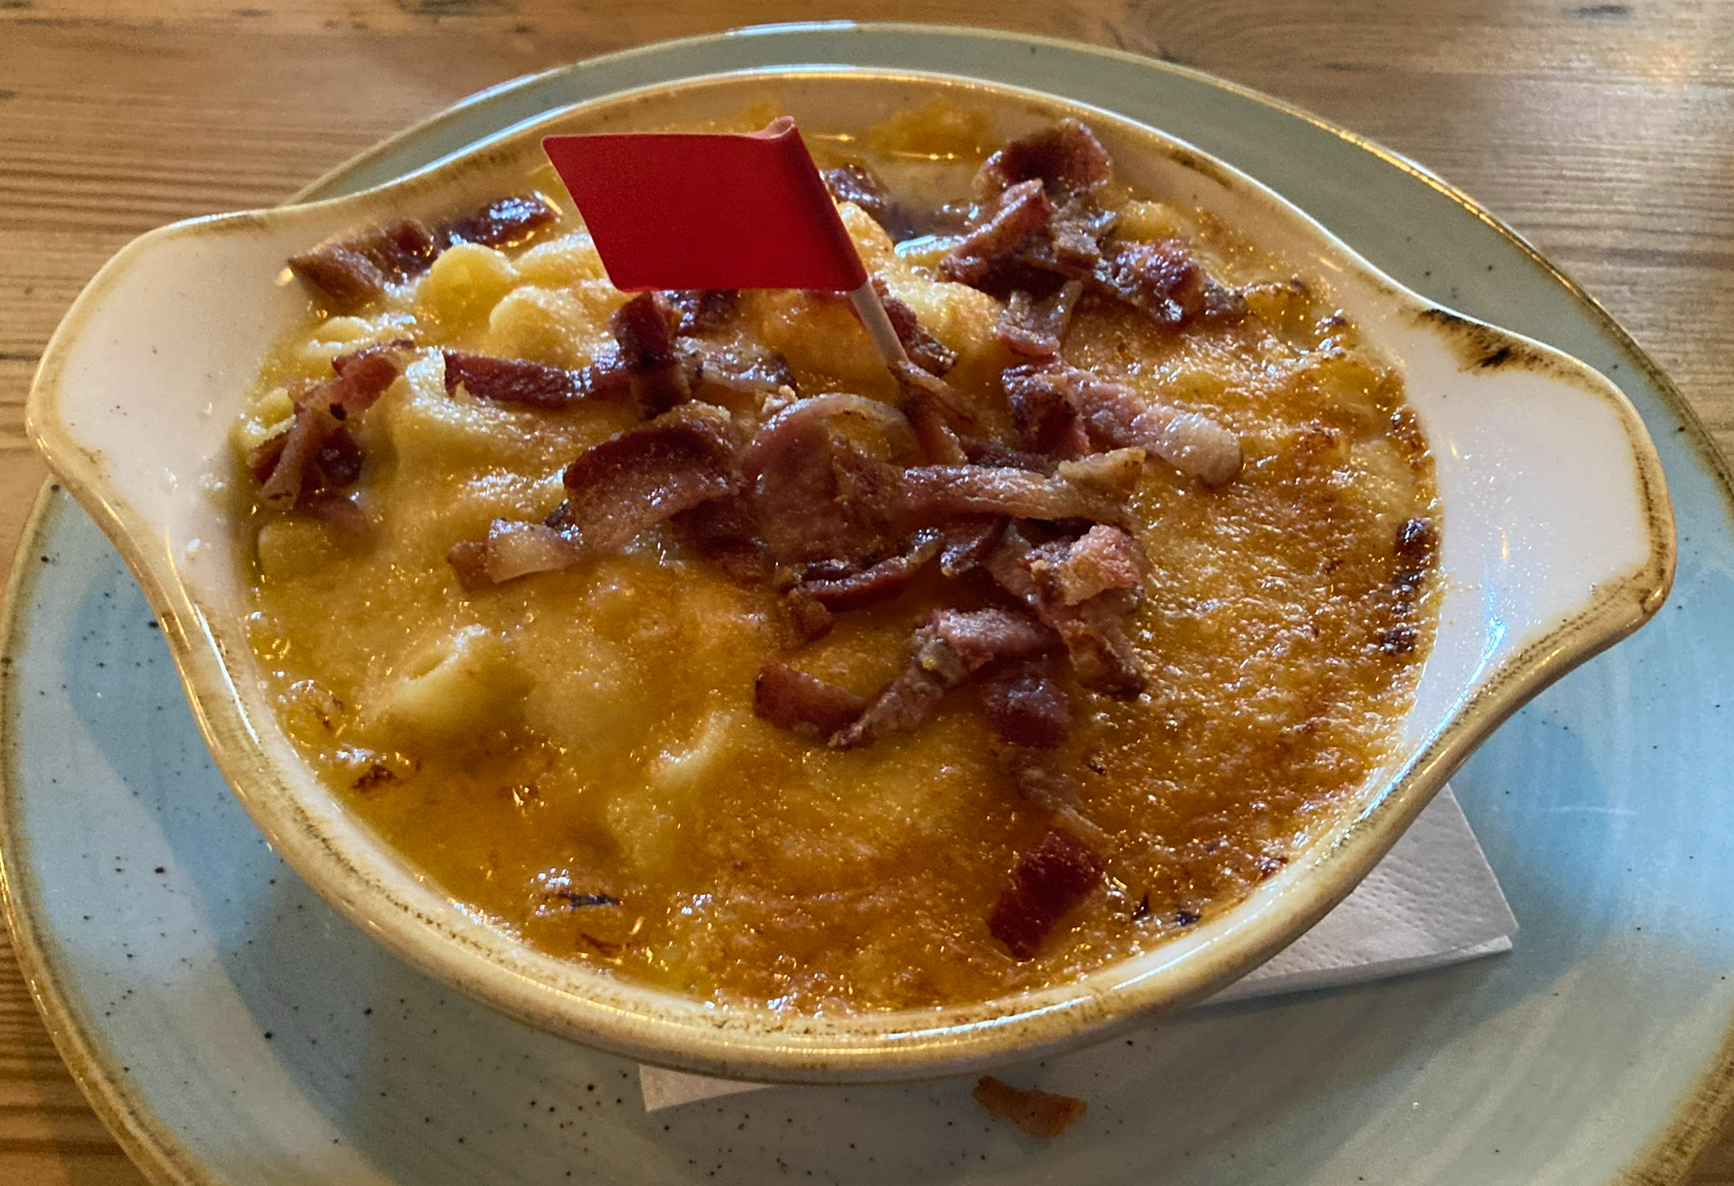 Theos Maccarone Cheese, with bacon added